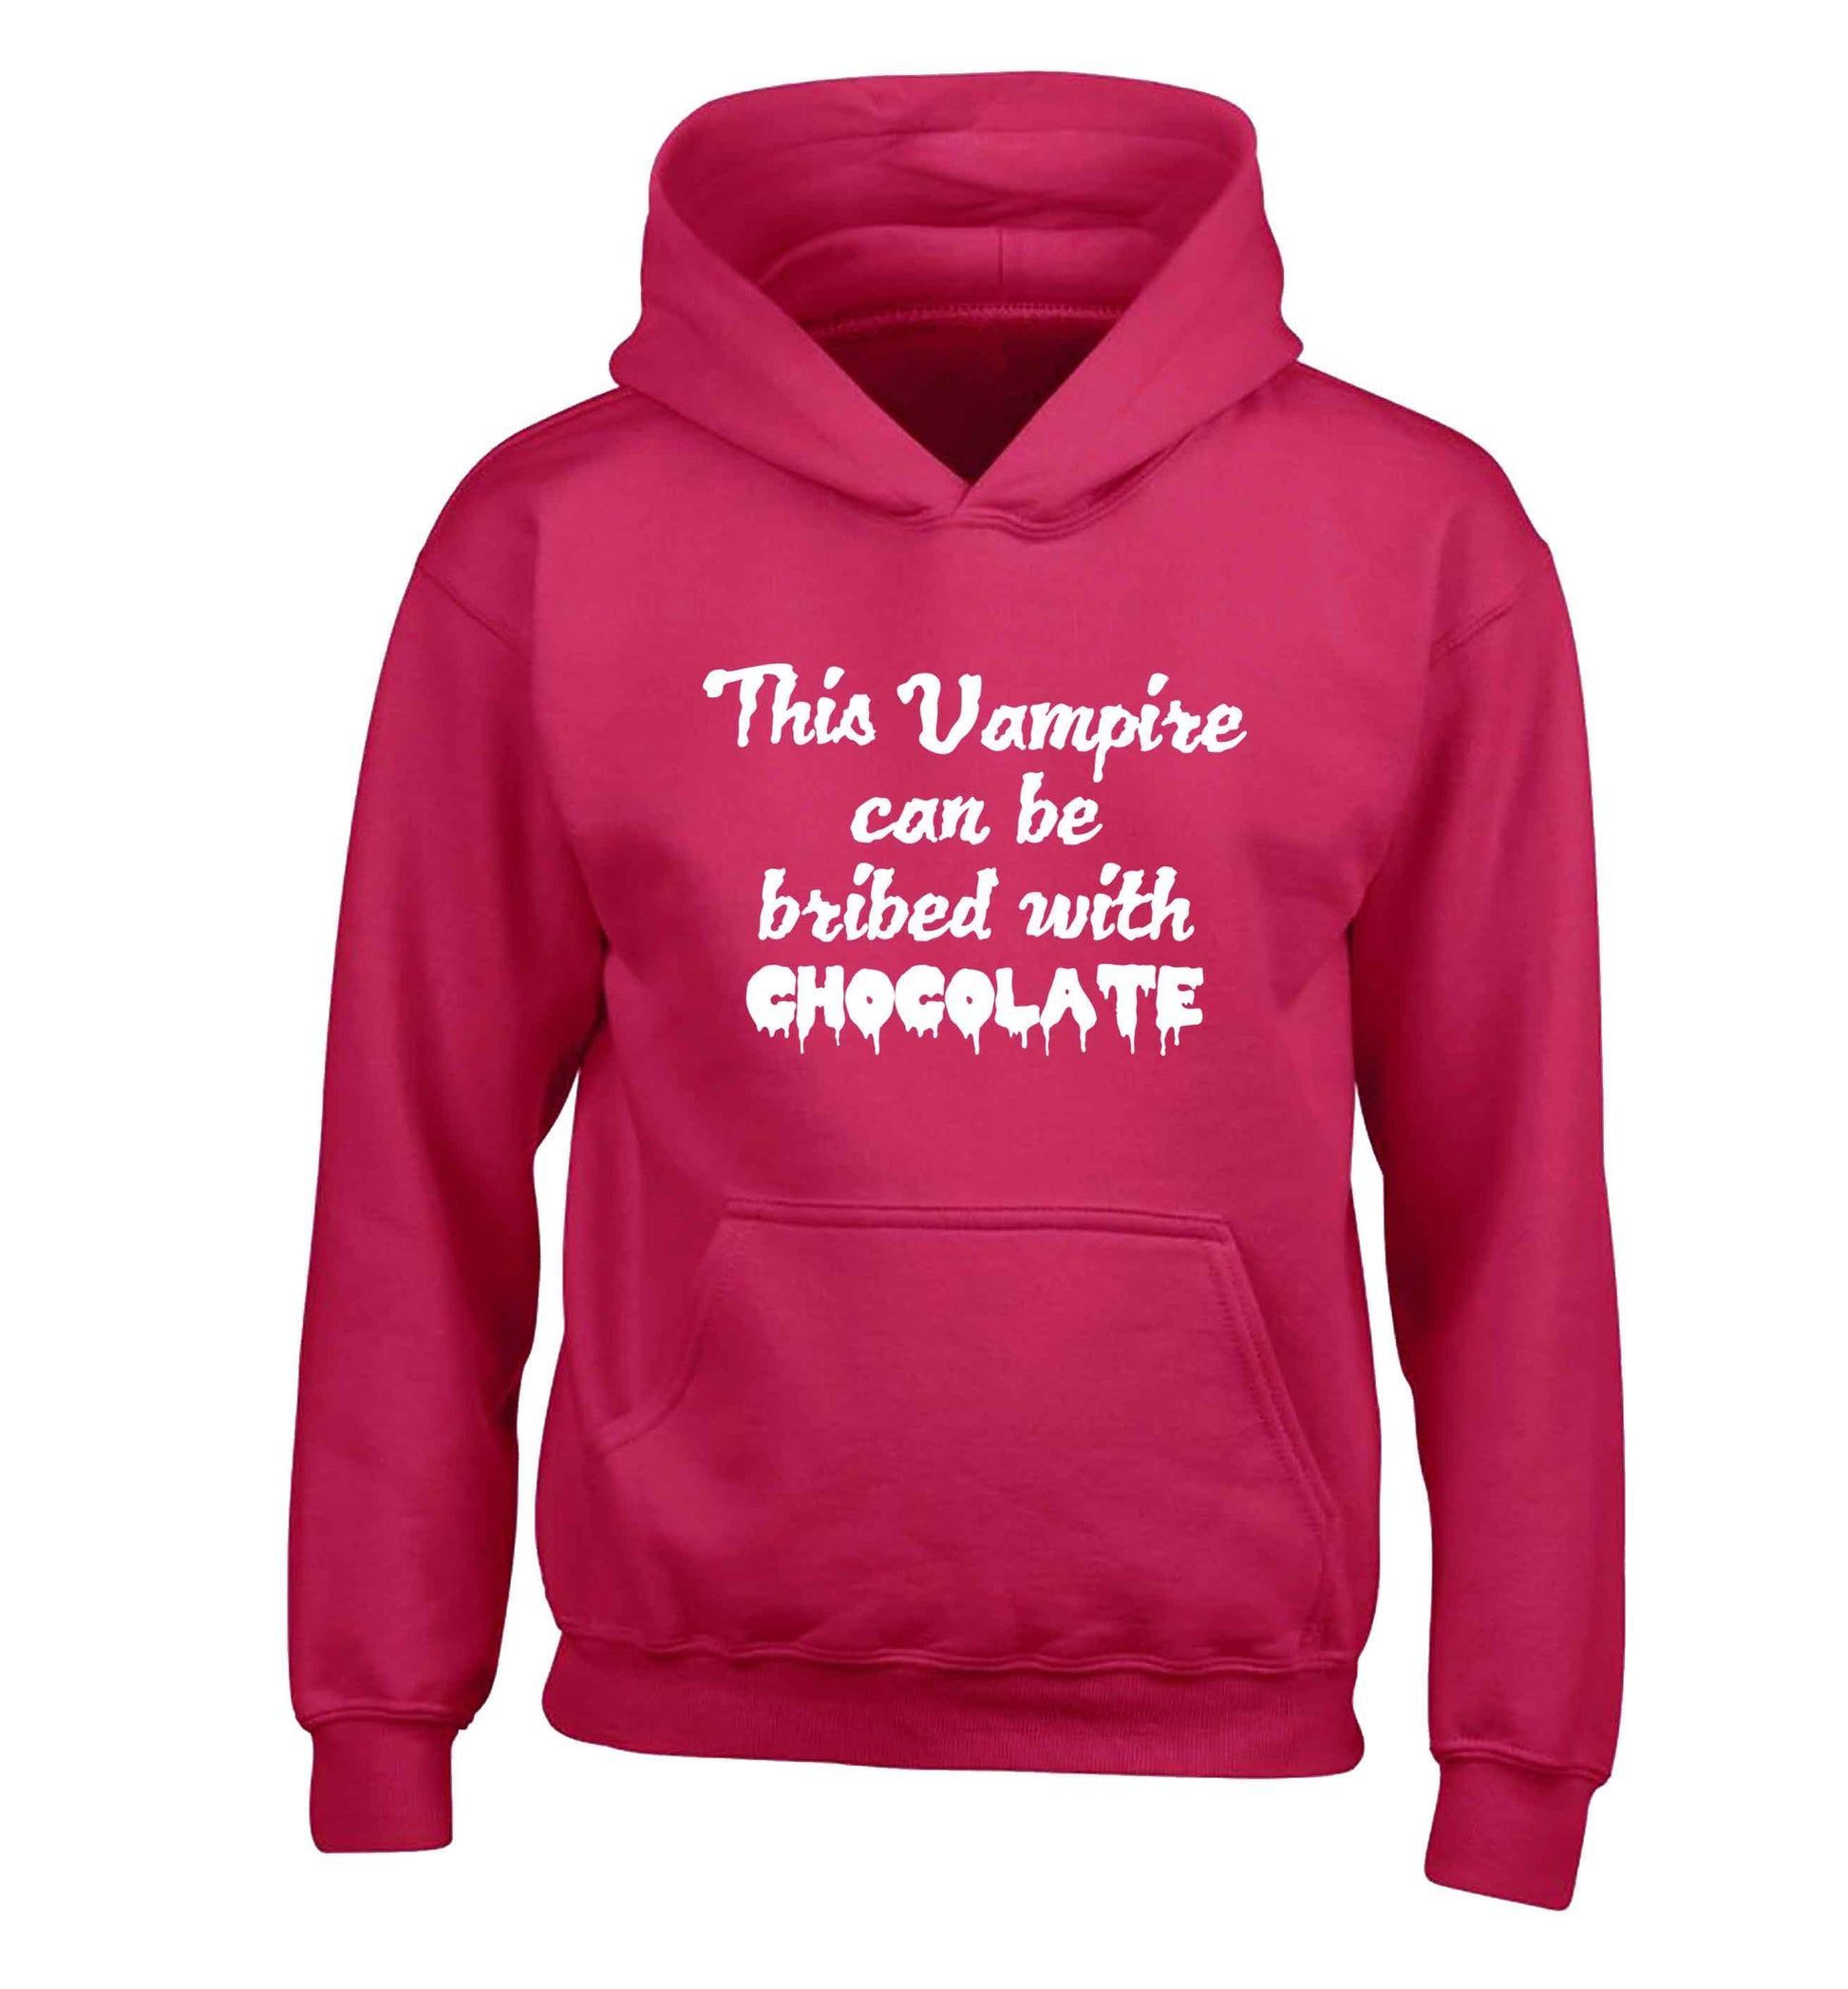 This vampire can be bribed with chocolate children's pink hoodie 12-13 Years